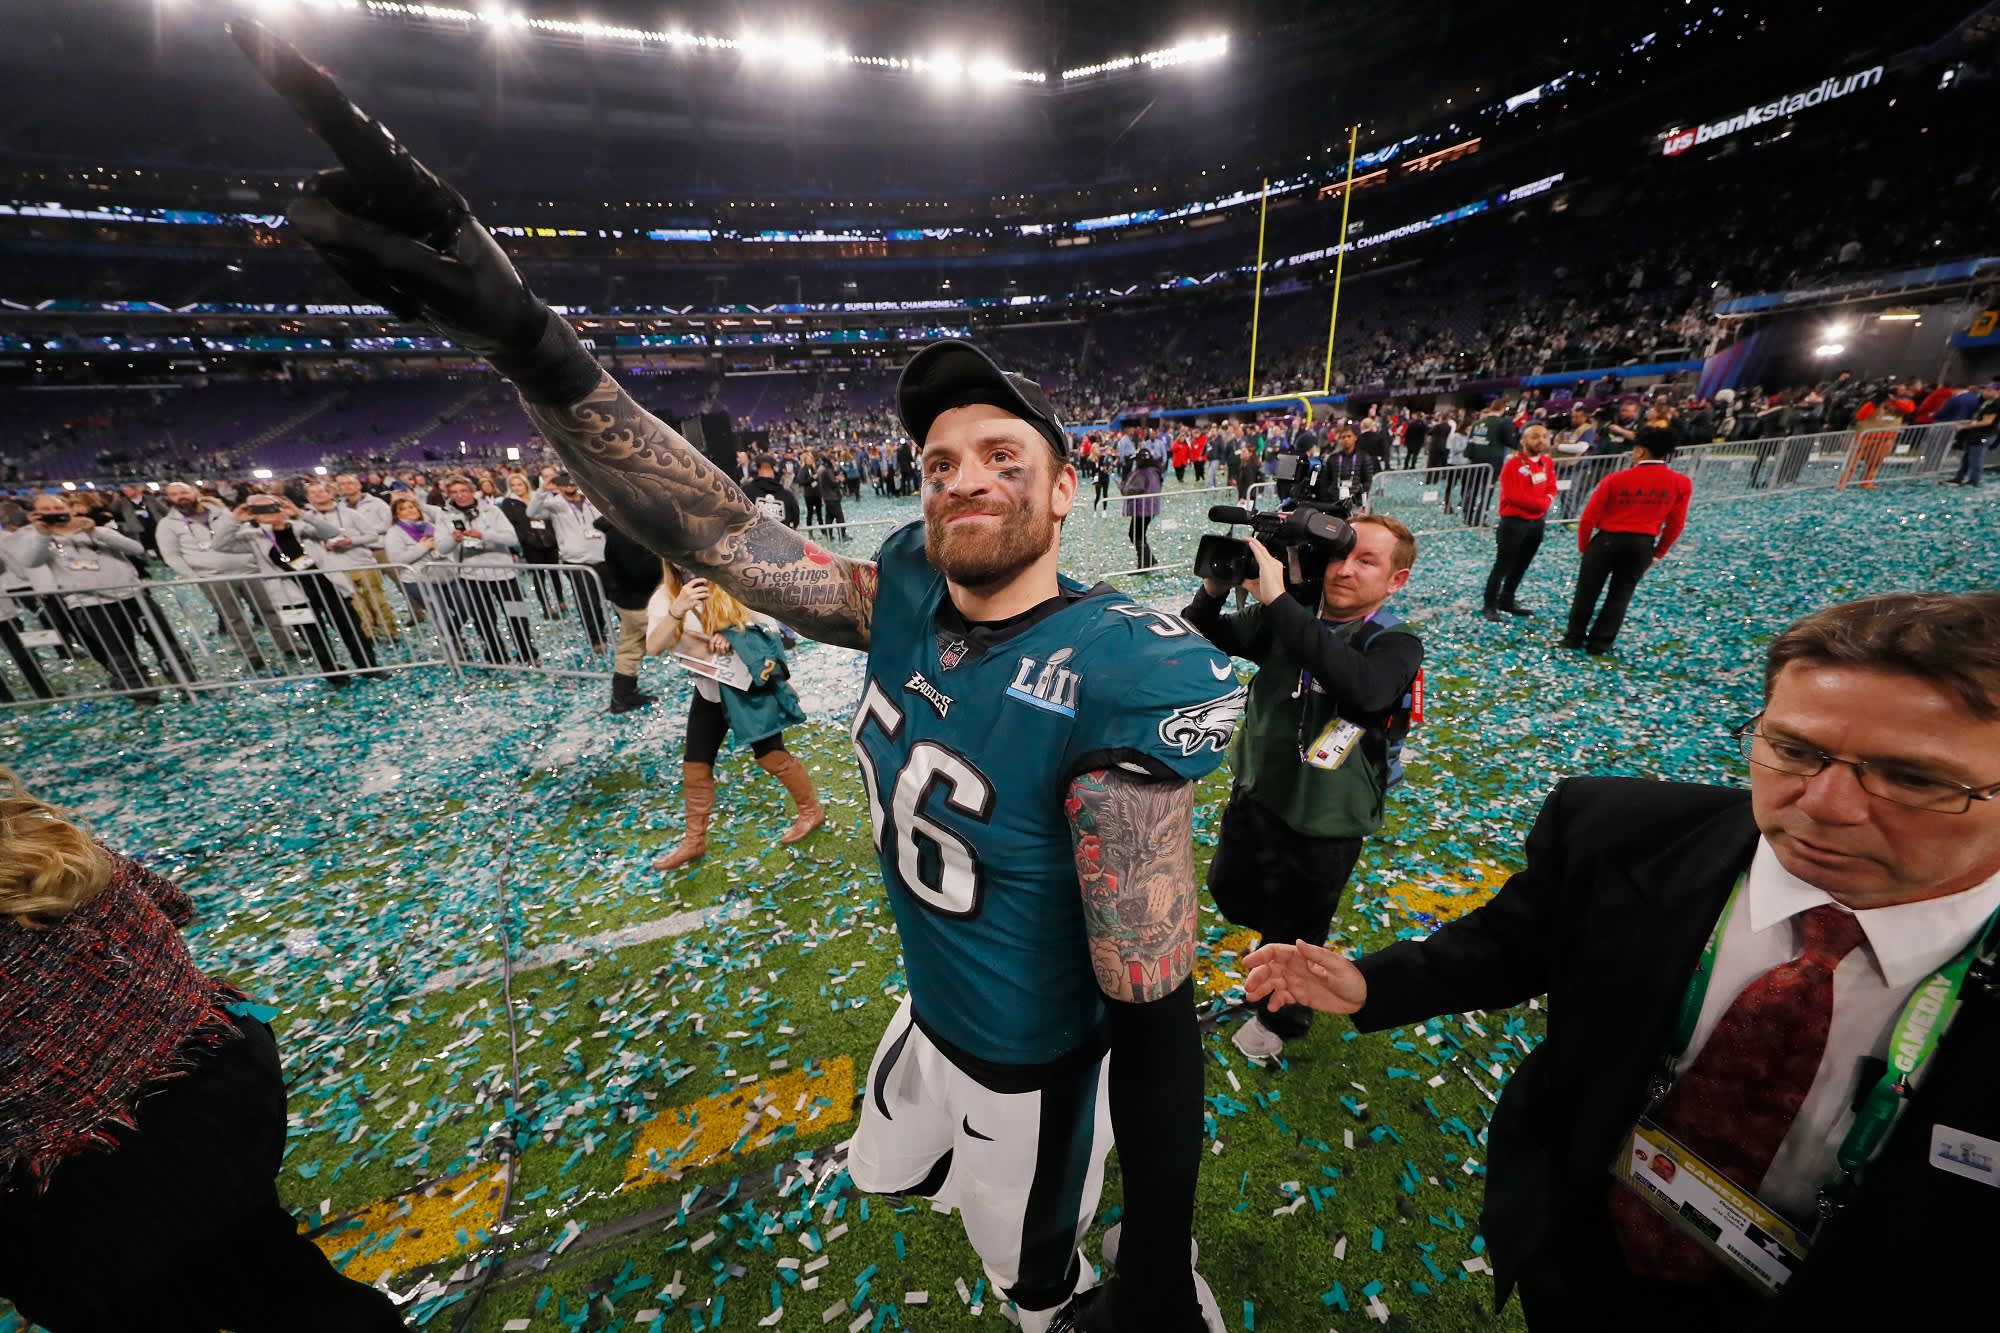 Super Bowl winner Chris Long donated his entire 2017 salary to charity